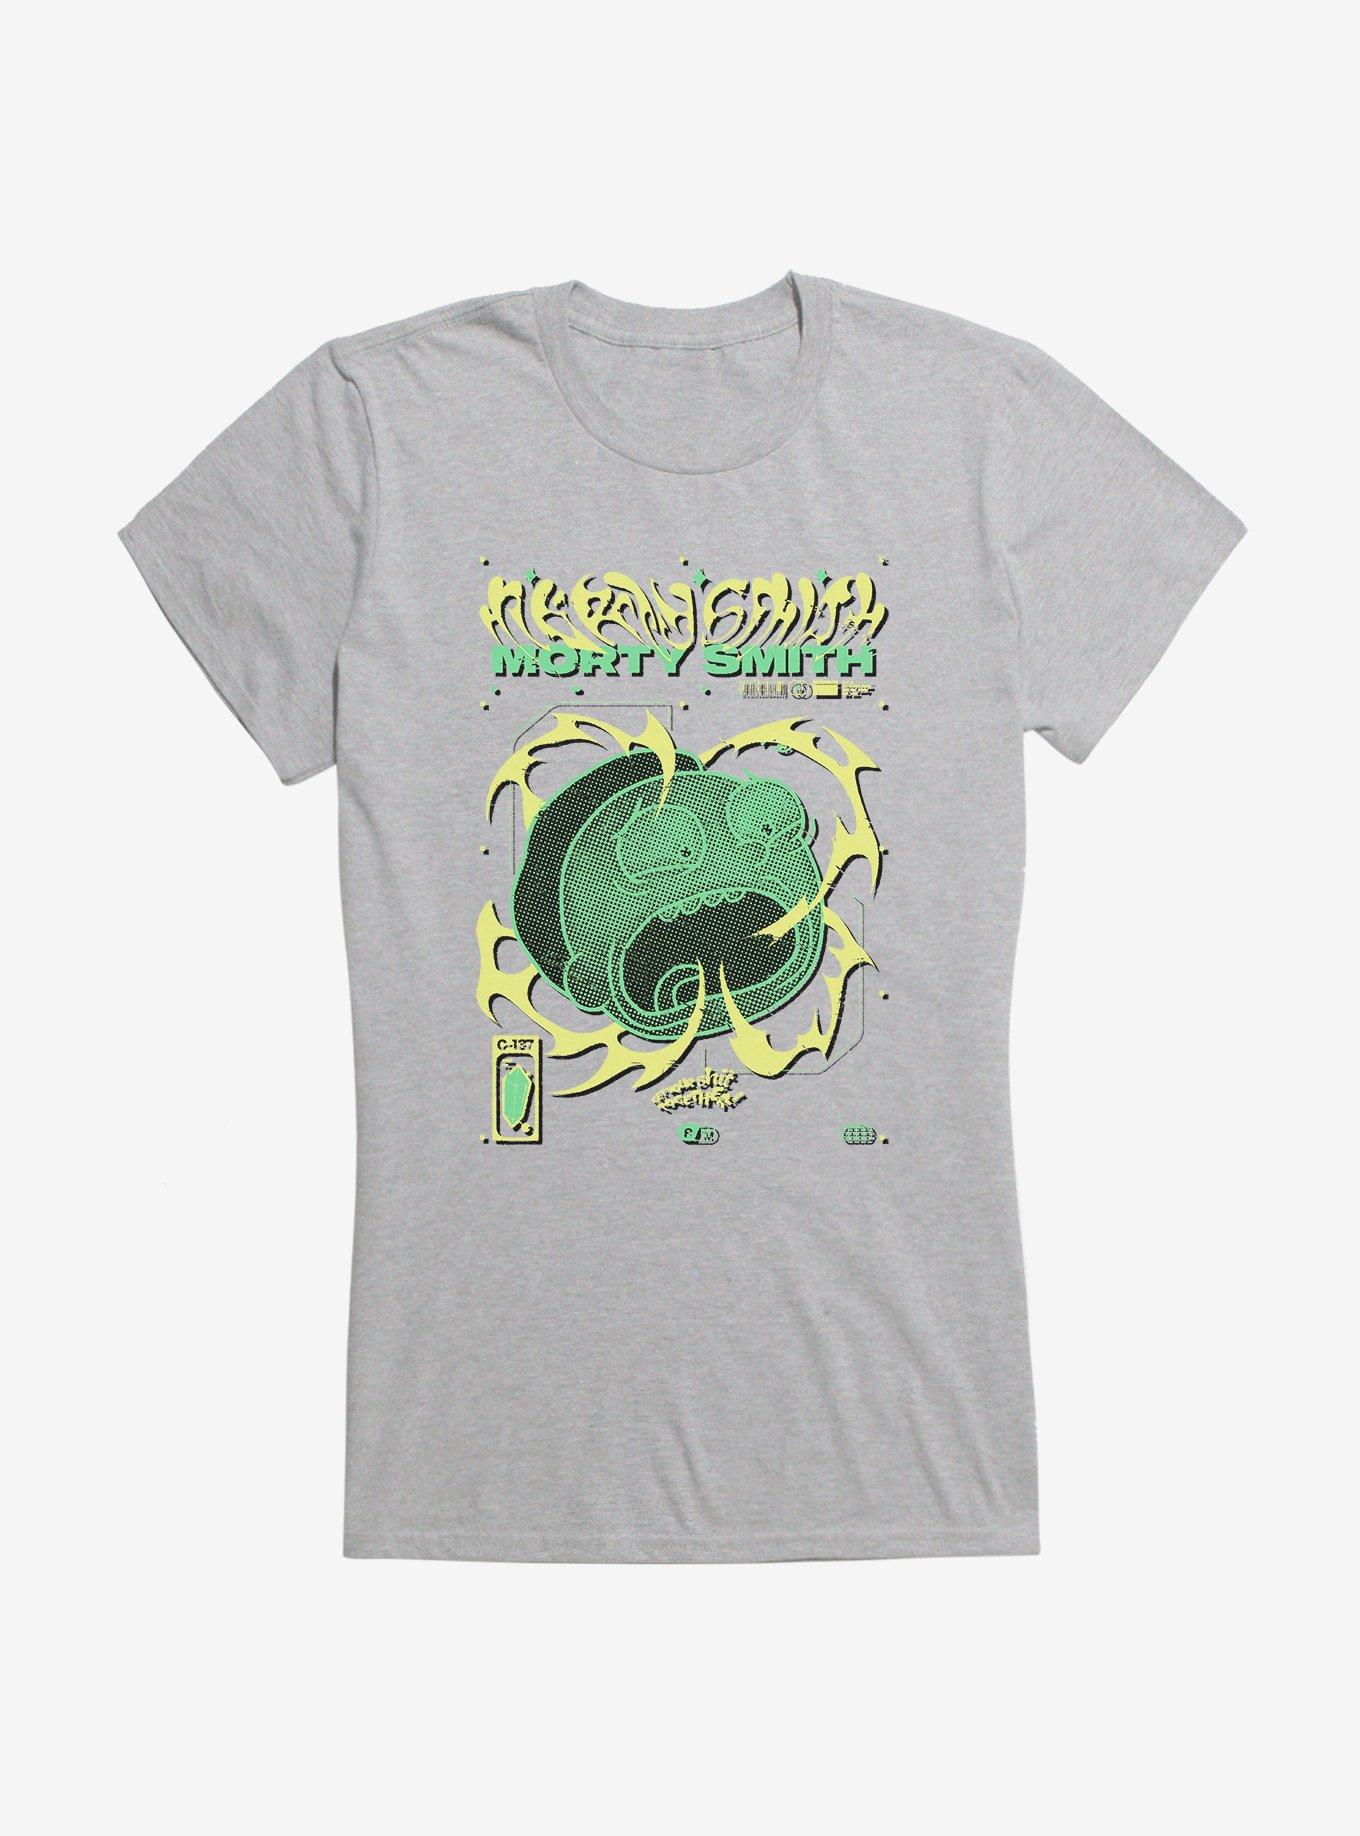 Rick And Morty Smith Girls T-Shirt